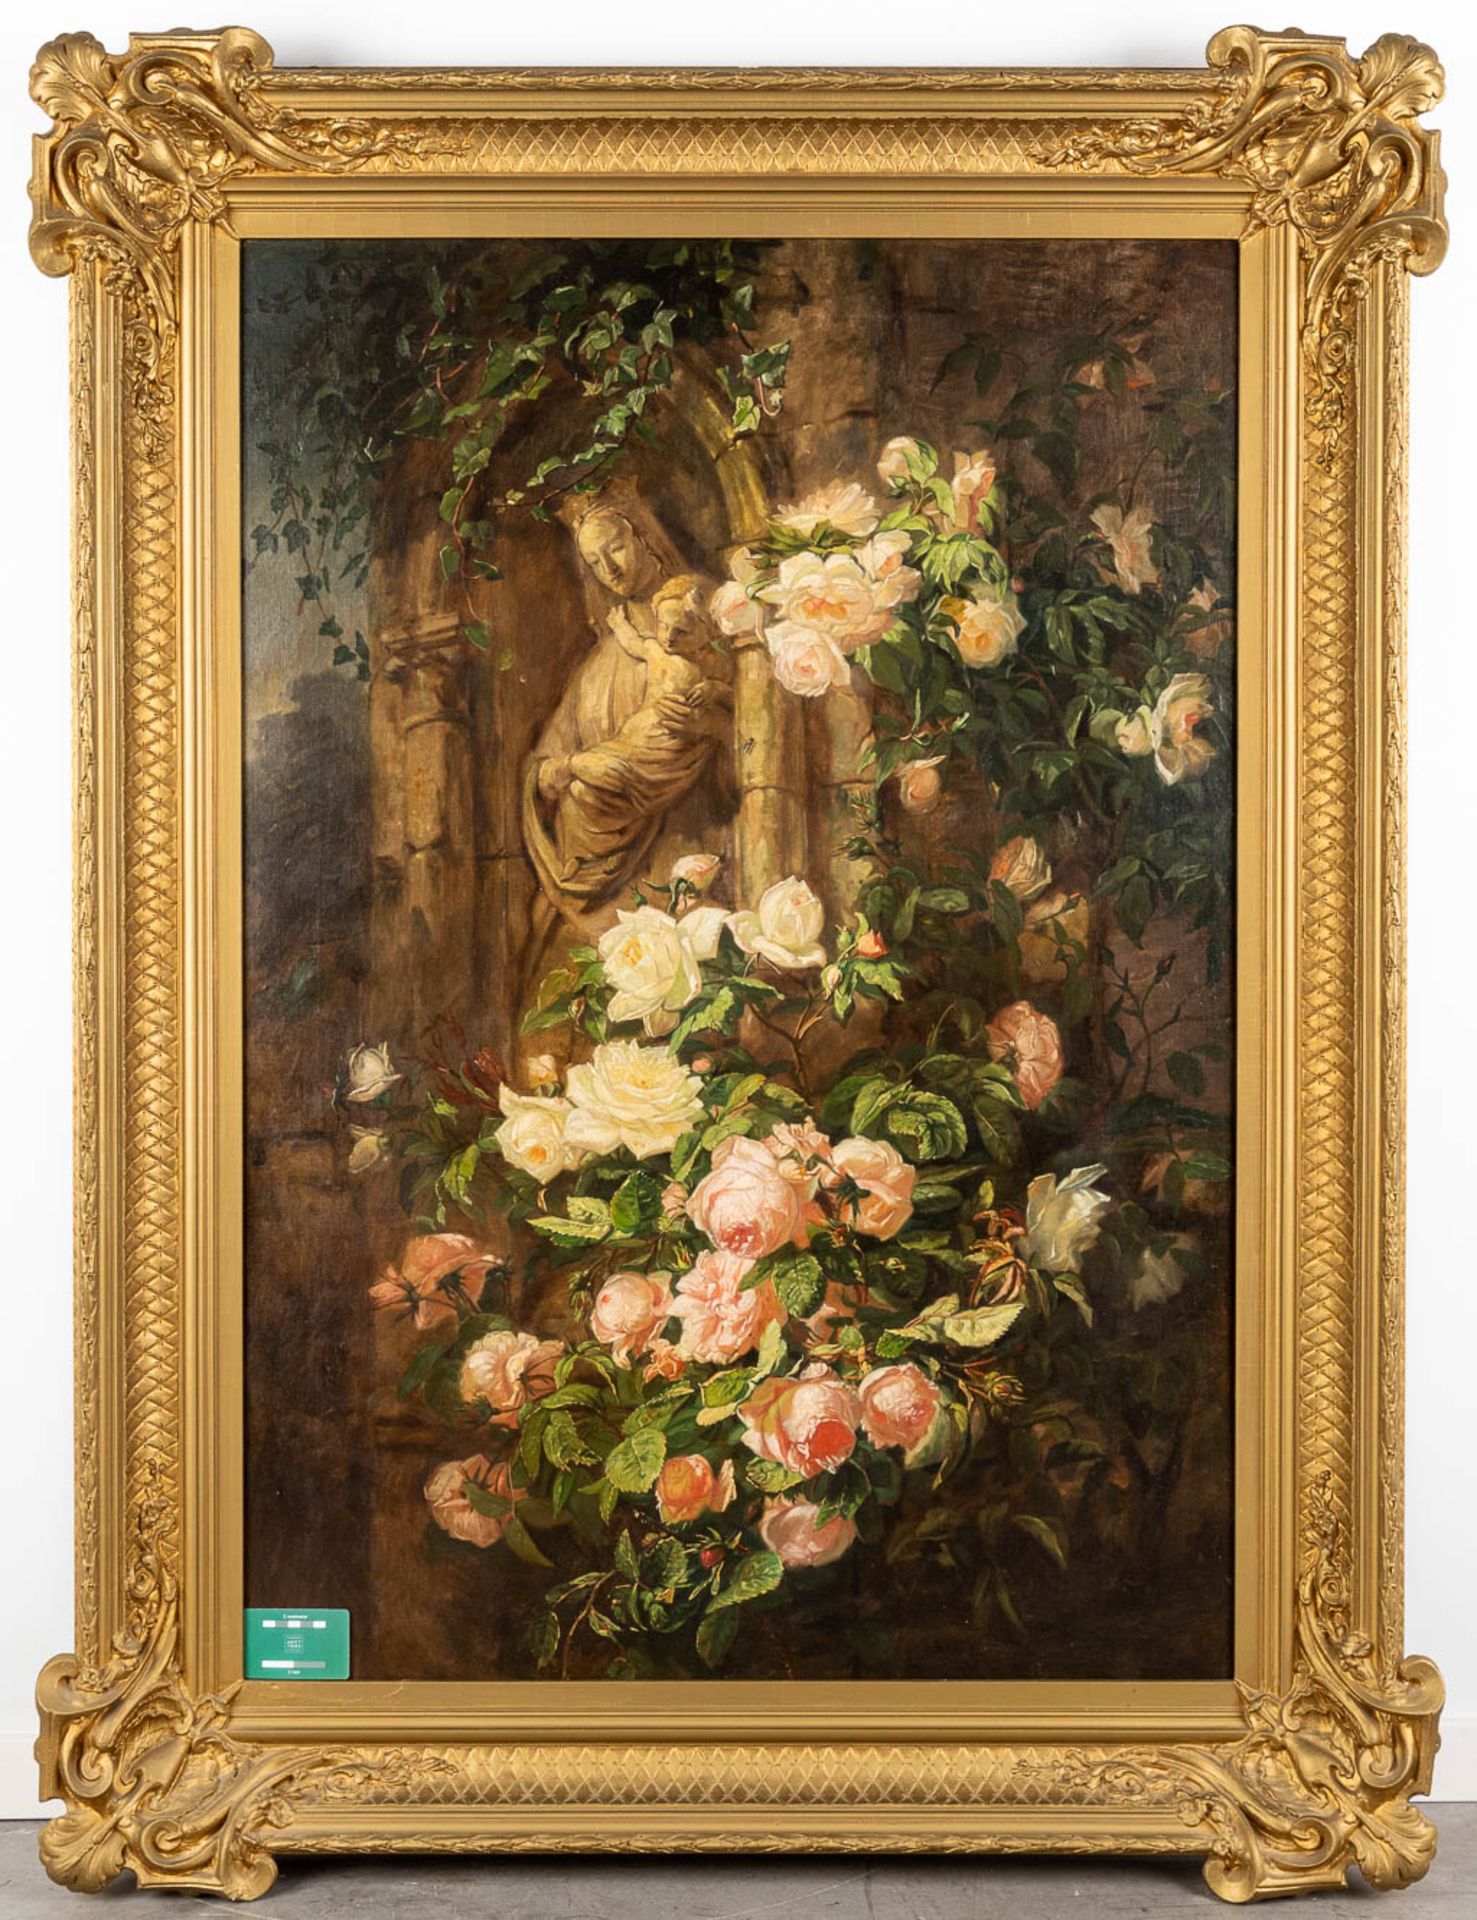 Jean-Baptiste ROBIE (1821-1910) 'Stillife with Madonna and flowers' a fine painting, oil on canvas. - Image 2 of 10